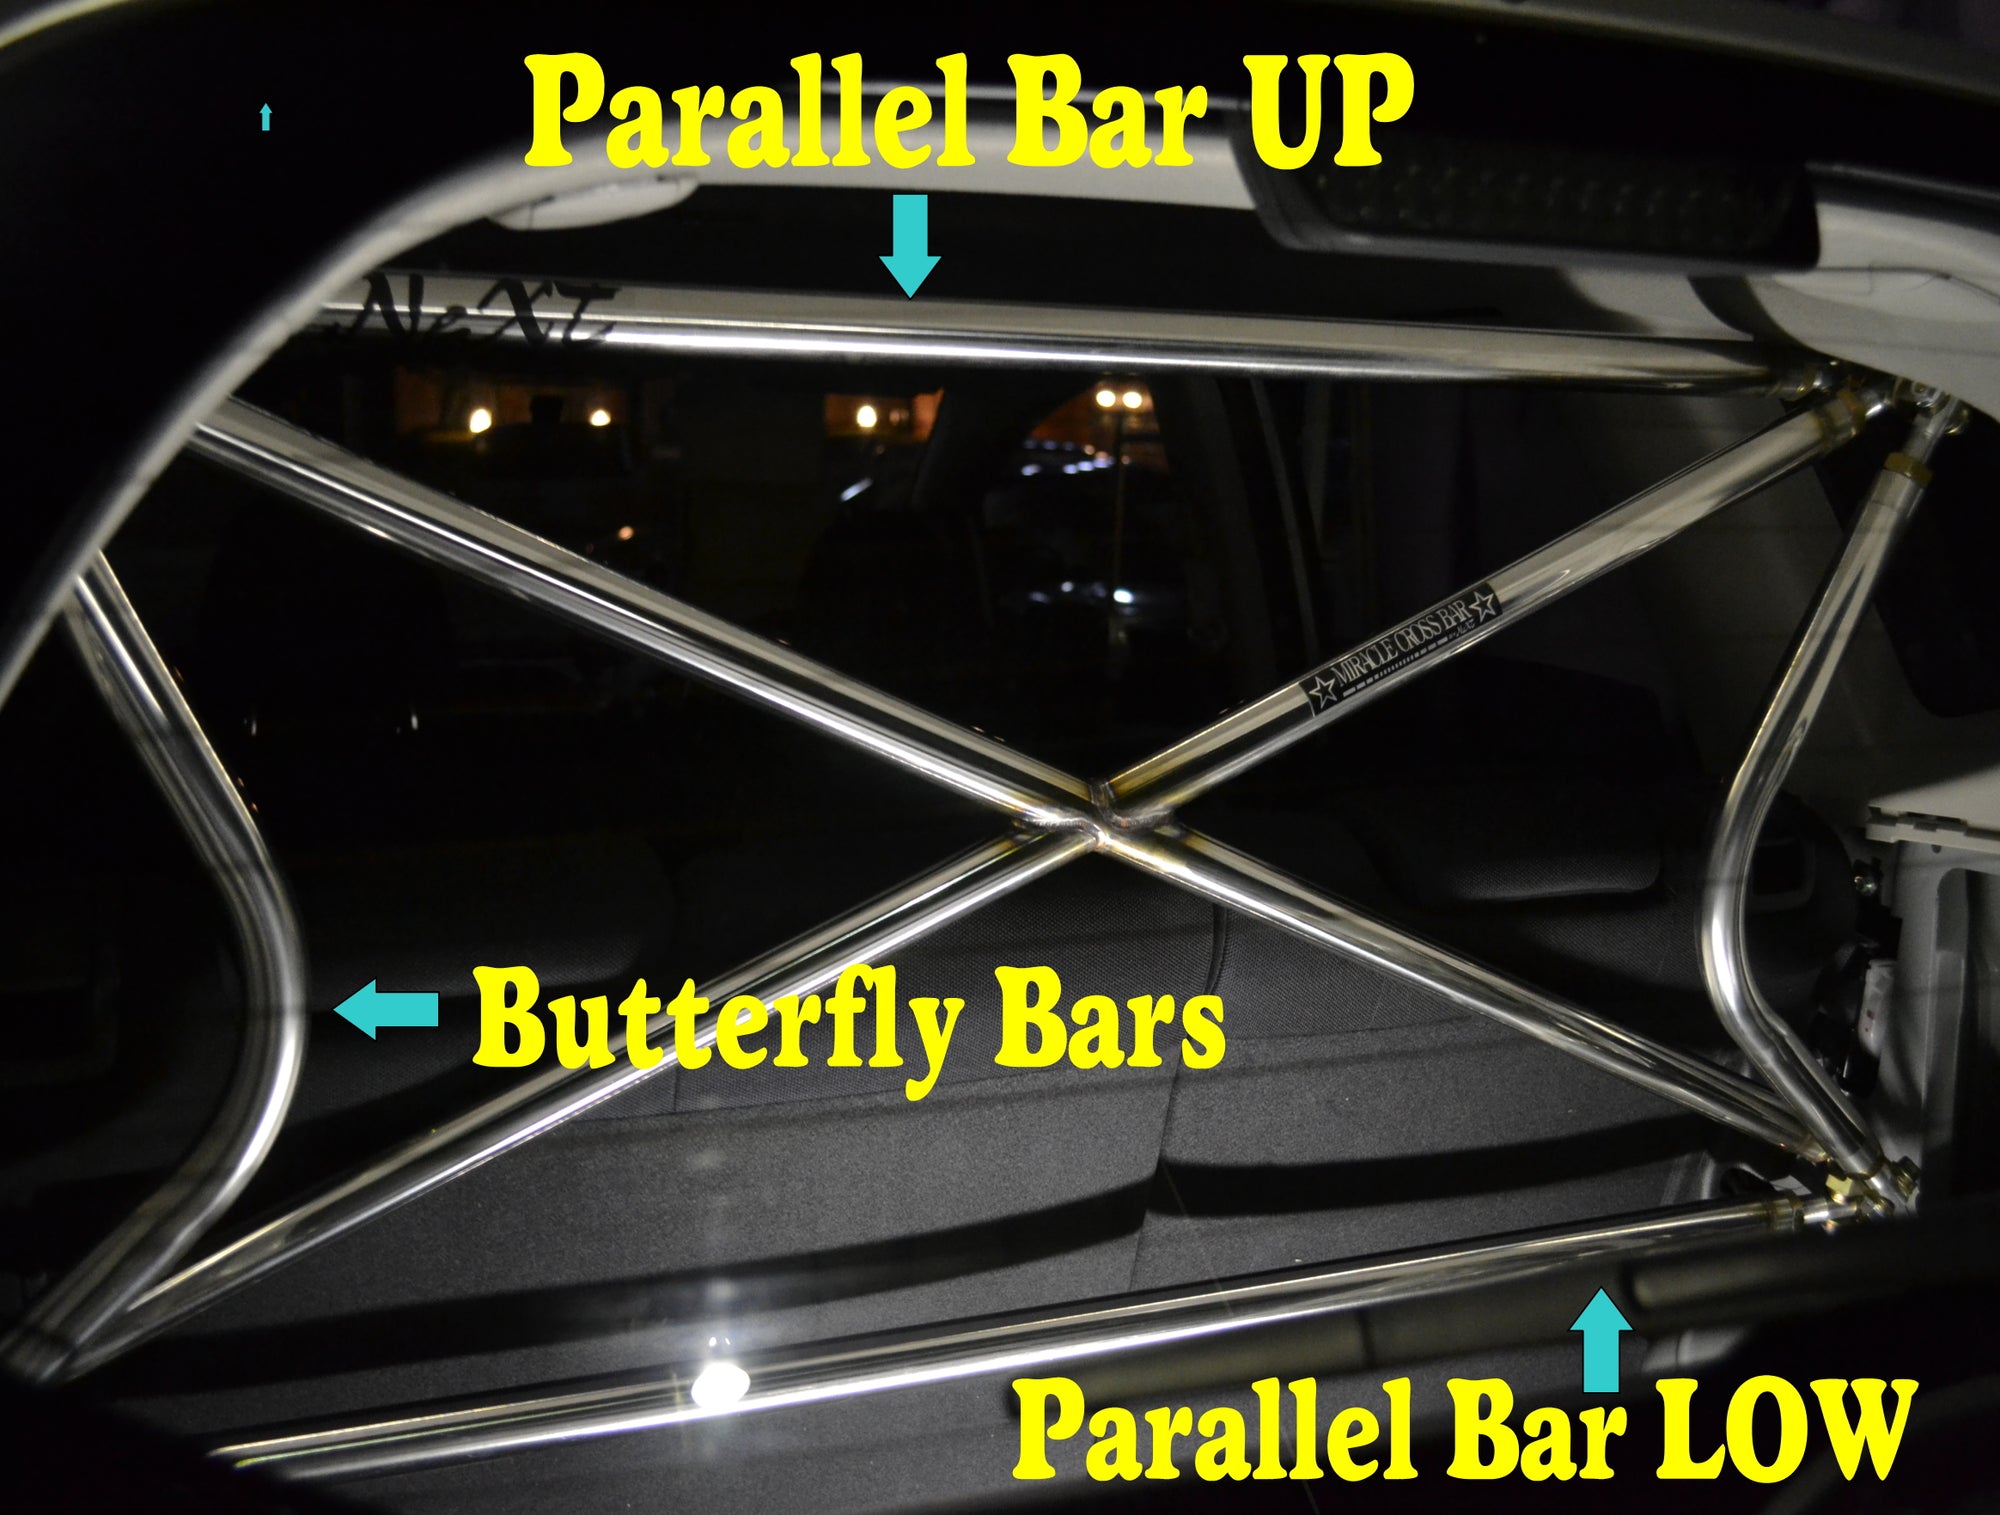 NEXT MIRACLE CROSS BAR BUTTERFLY BAR RIGHT & LEFT STAINLESS 35 FOR SUZUKI ALTO HA36 C P NEXT-01415